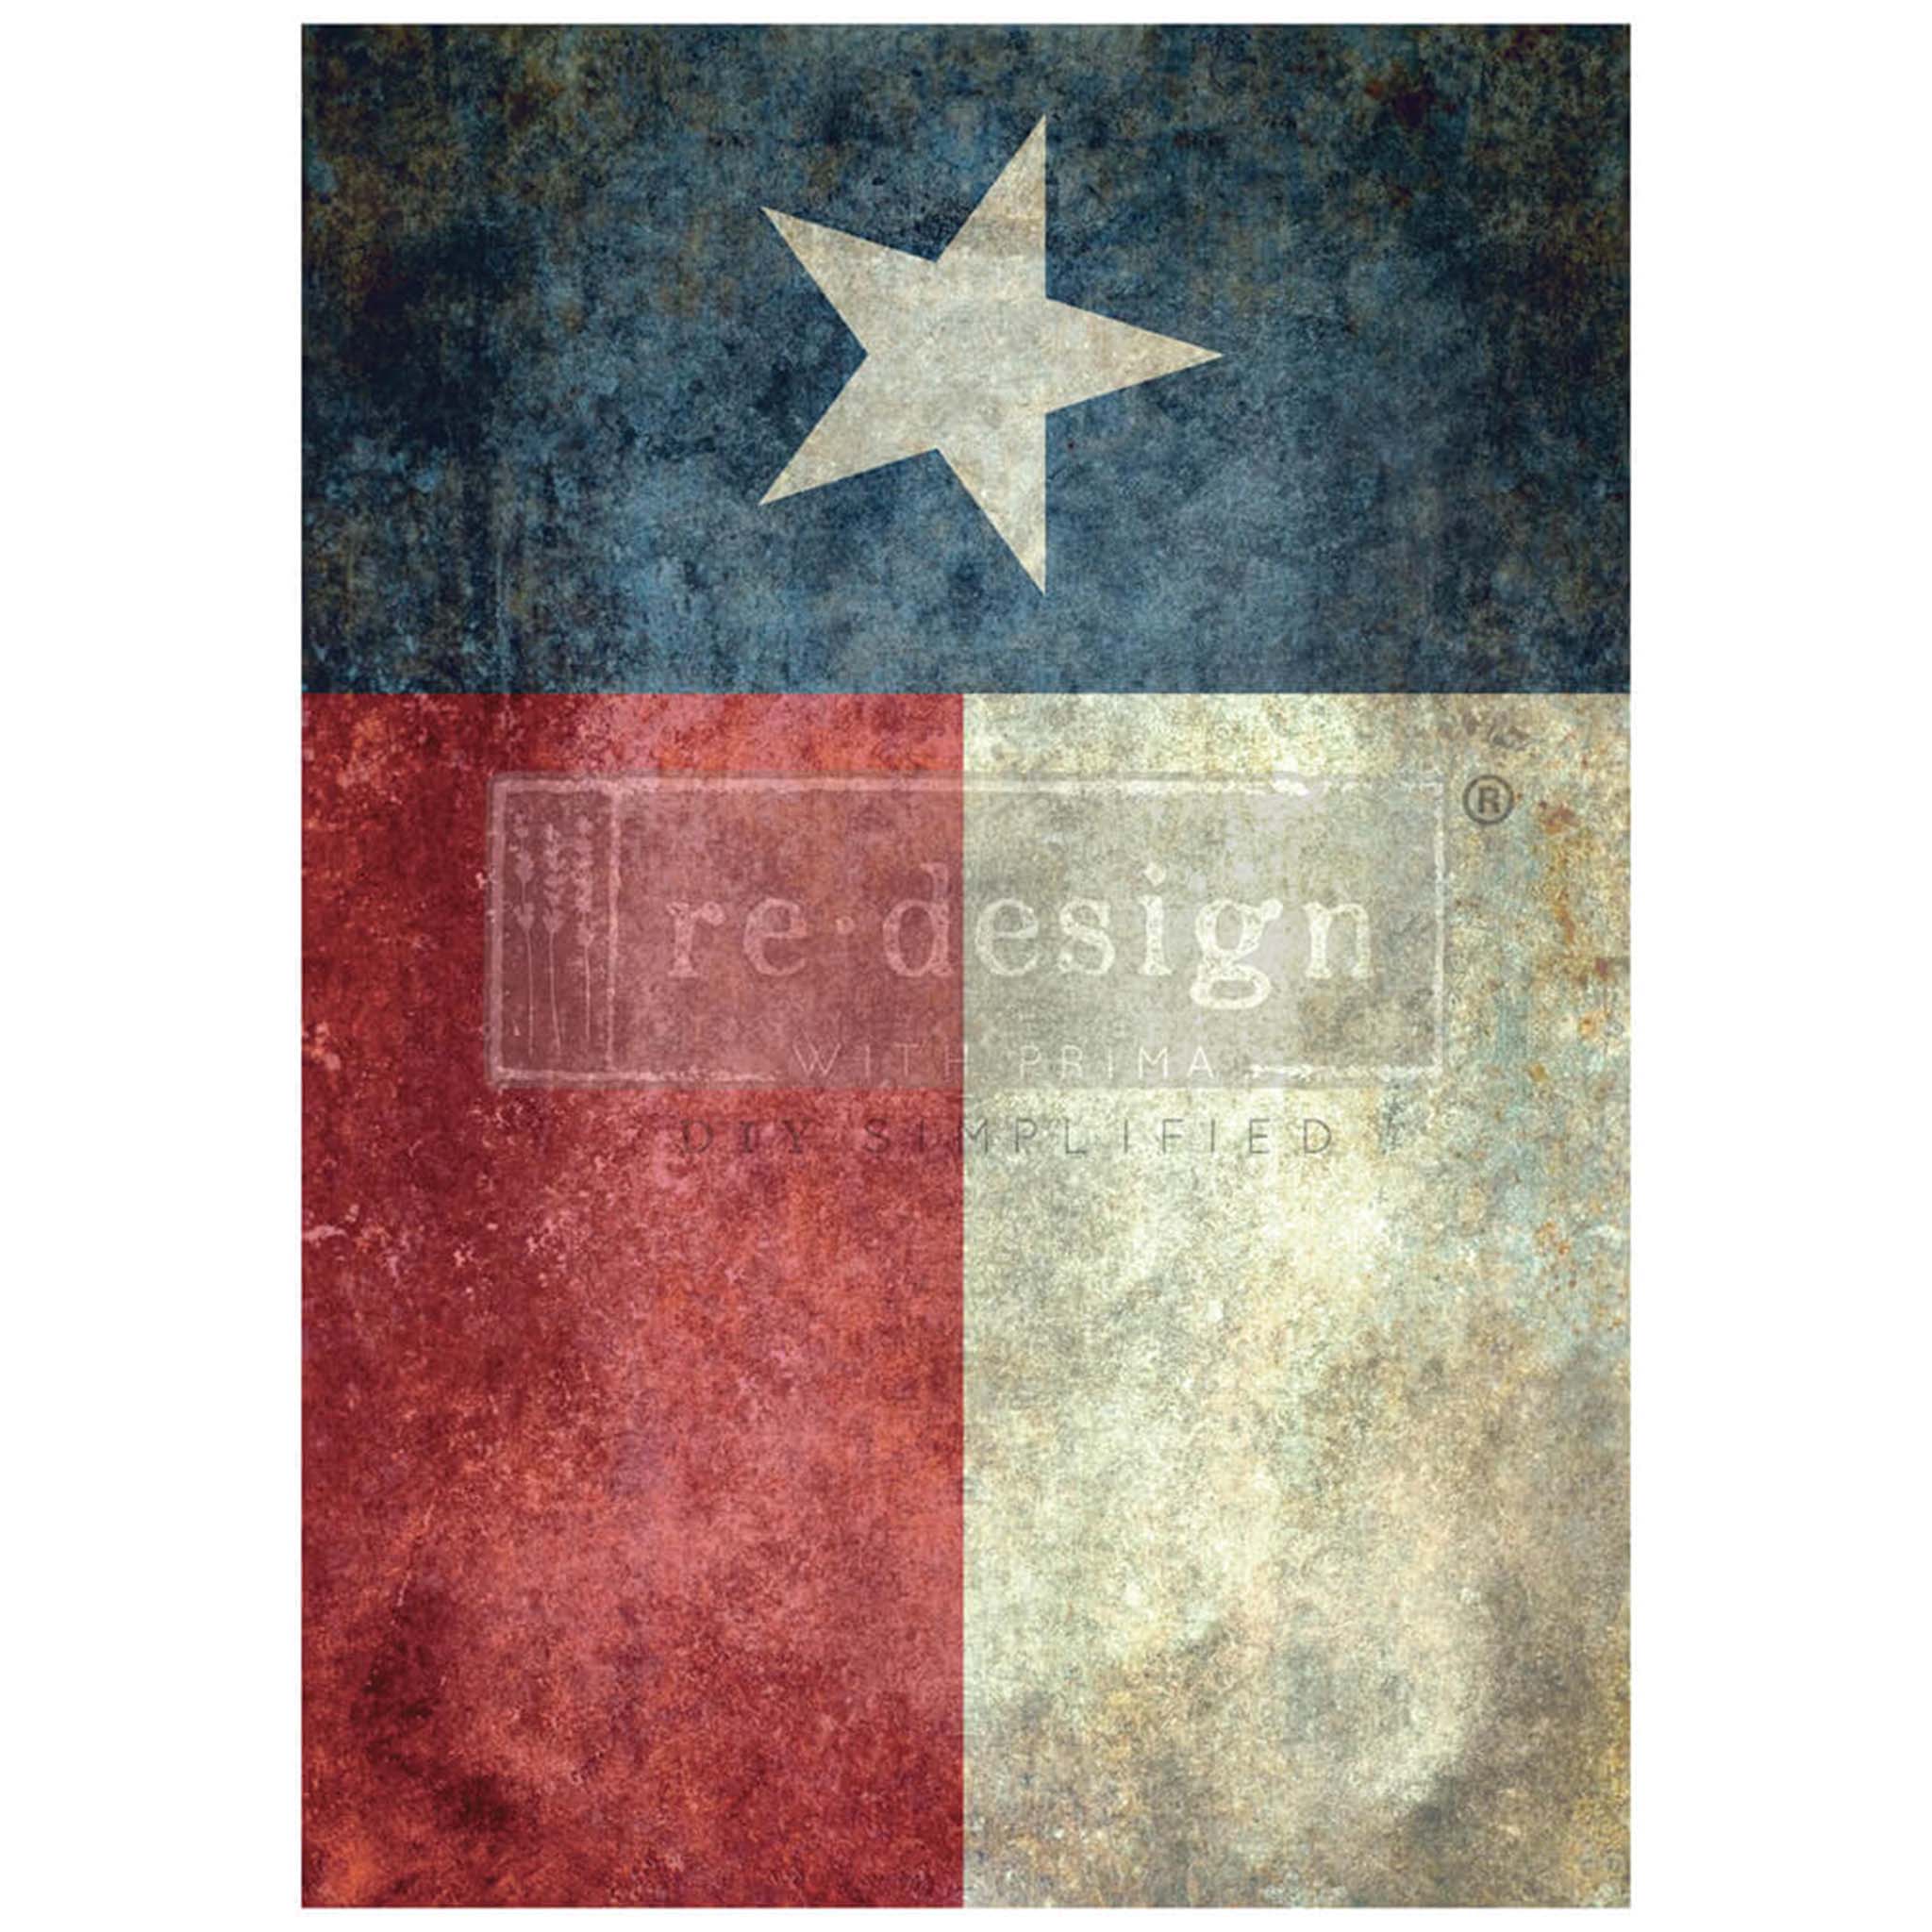 A1 fiber paper that features a distressed Texas flag against a white background.